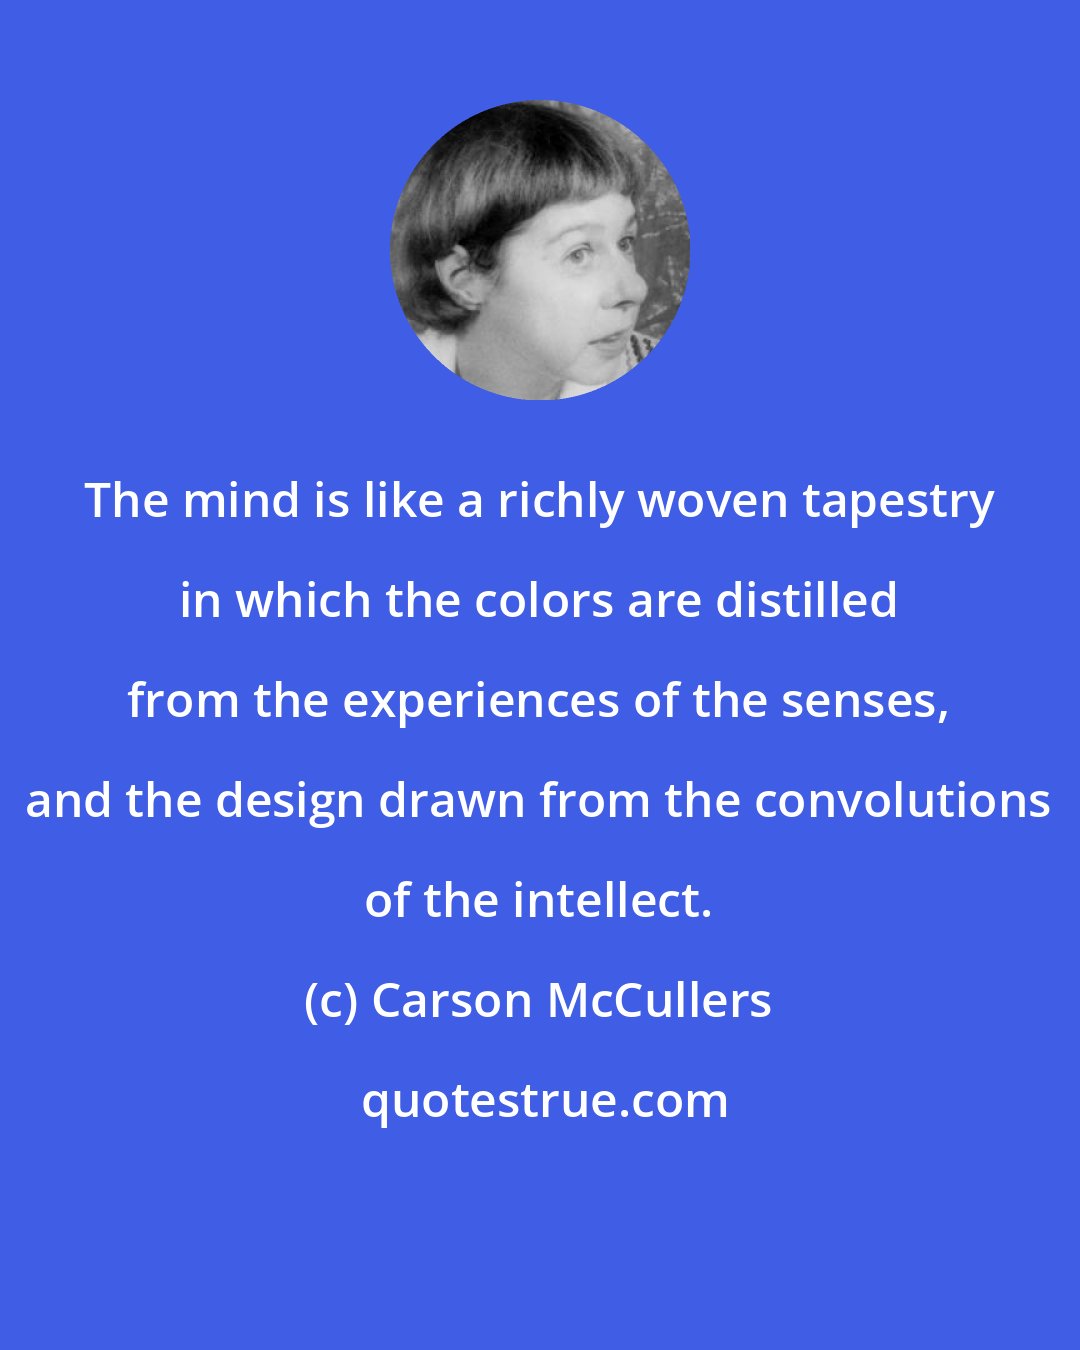 Carson McCullers: The mind is like a richly woven tapestry in which the colors are distilled from the experiences of the senses, and the design drawn from the convolutions of the intellect.